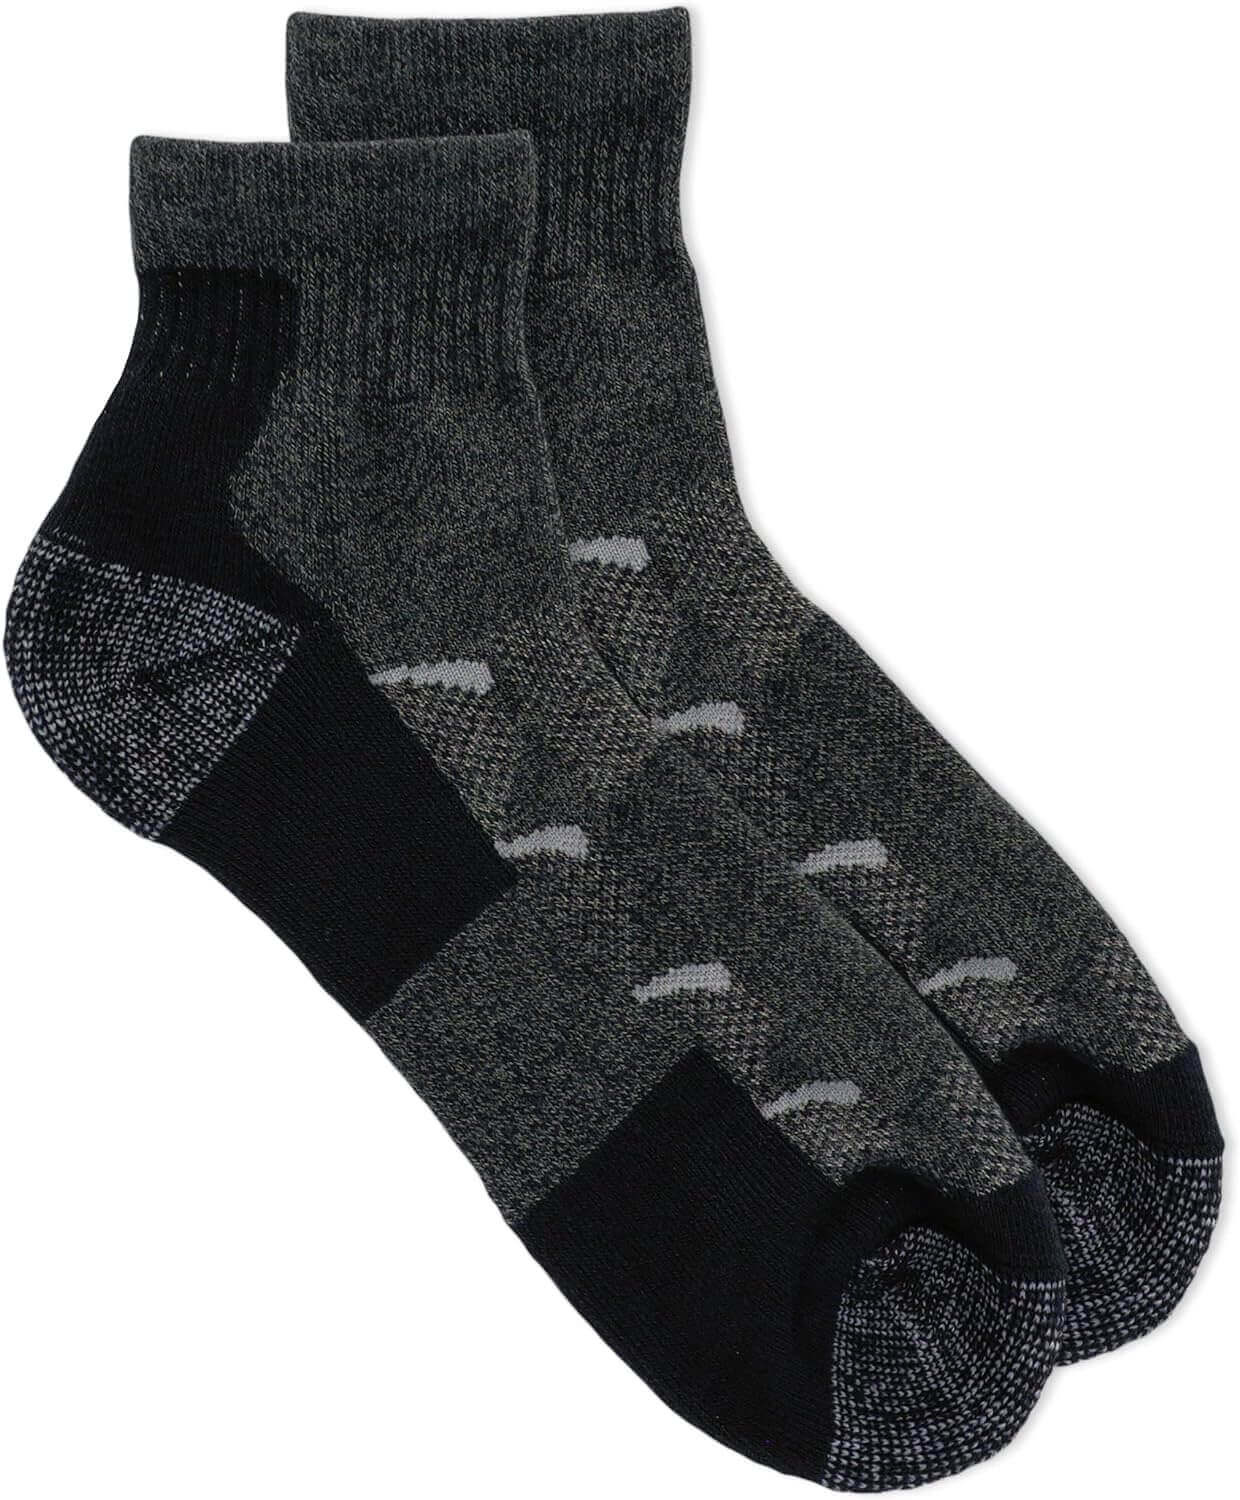 Shop The Latest >Merrell Men's and Women's Moab Hiking Mid Cushion Socks > *Only $21.00*> From The Top Brand > *Merrelll* > Shop Now and Get Free Shipping On Orders Over $45.00 >*Shop Earth Foot*